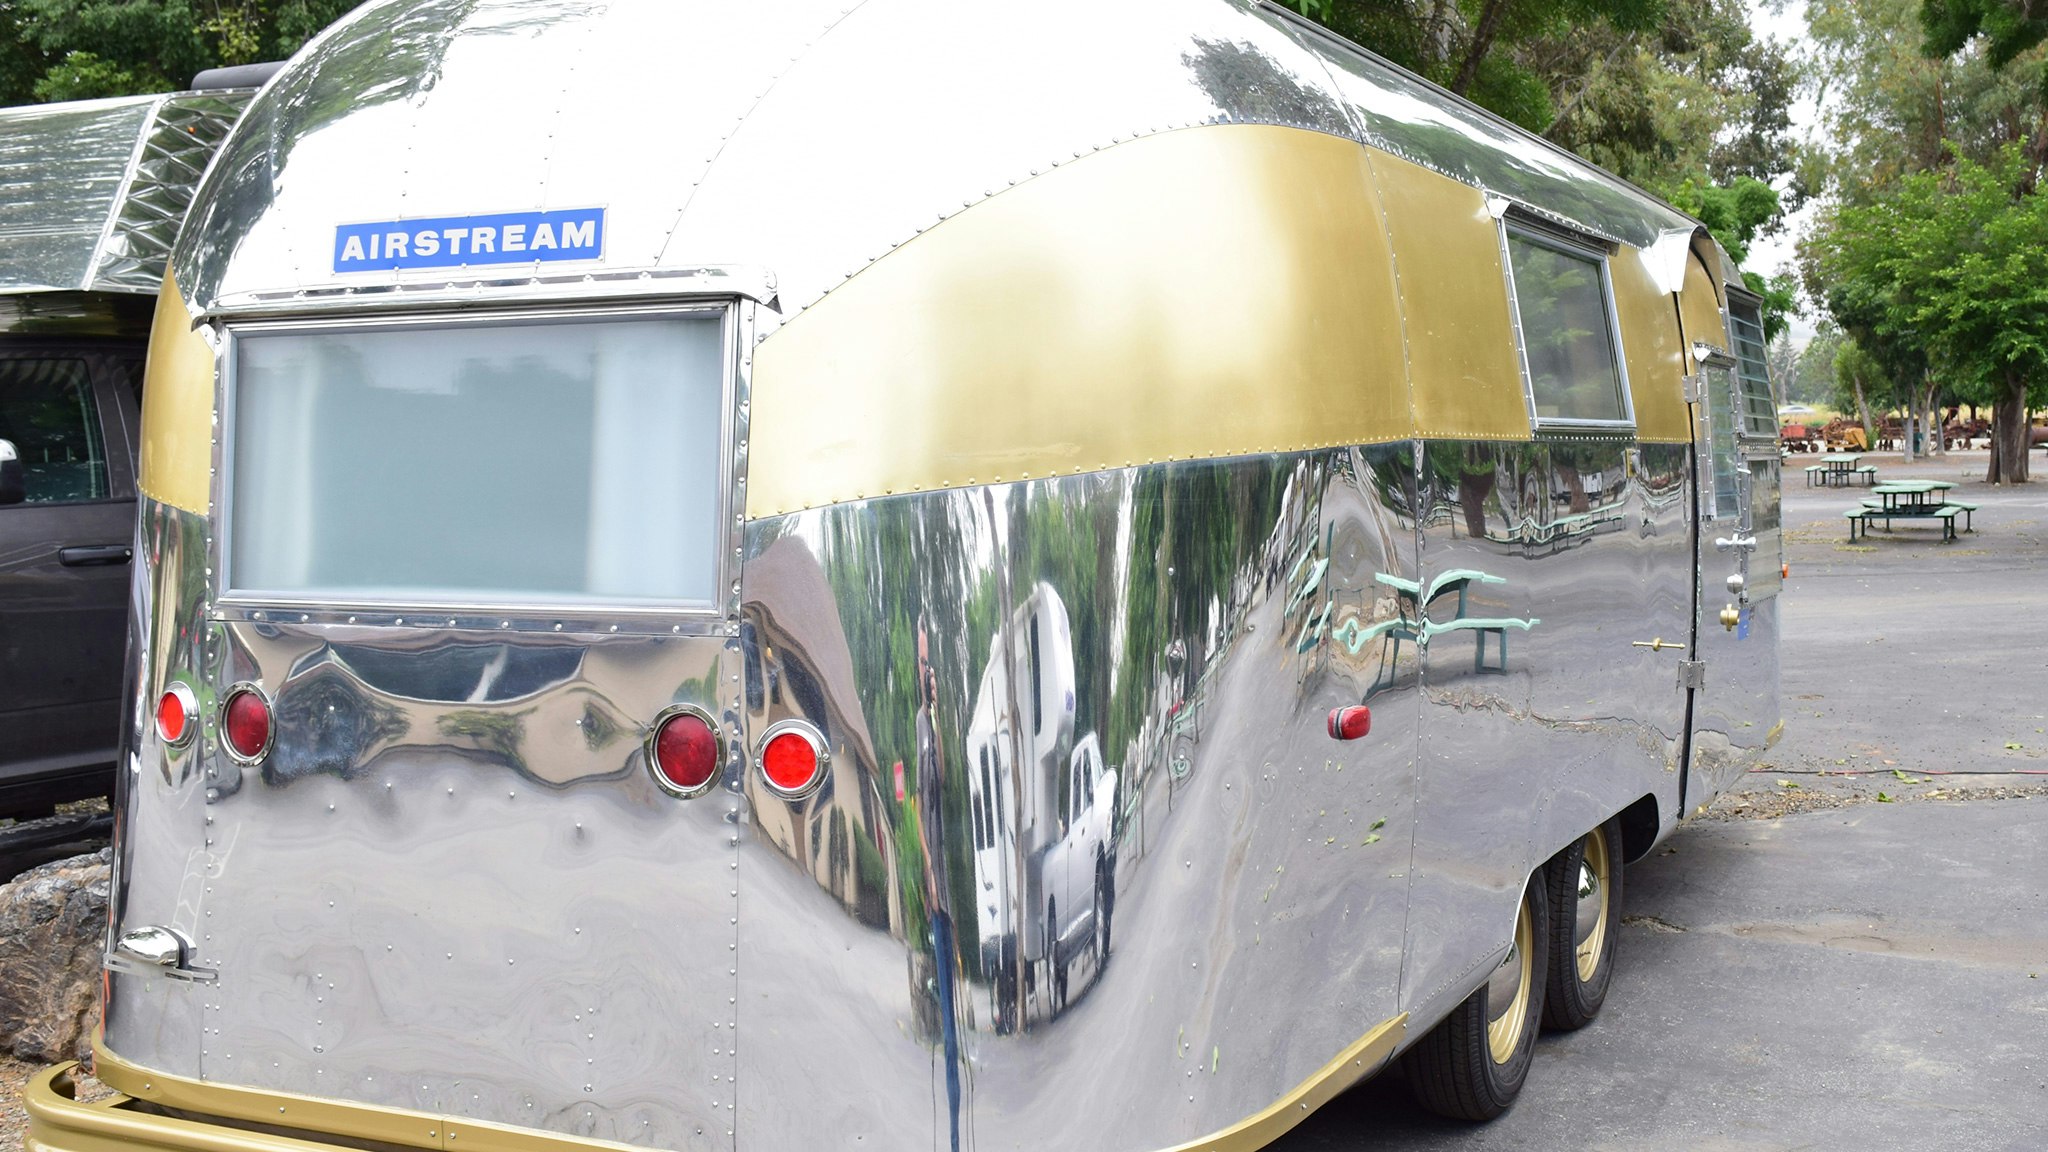 Rallying-In-A-Vintage-Airstream-Gold-blog-feature-desktop